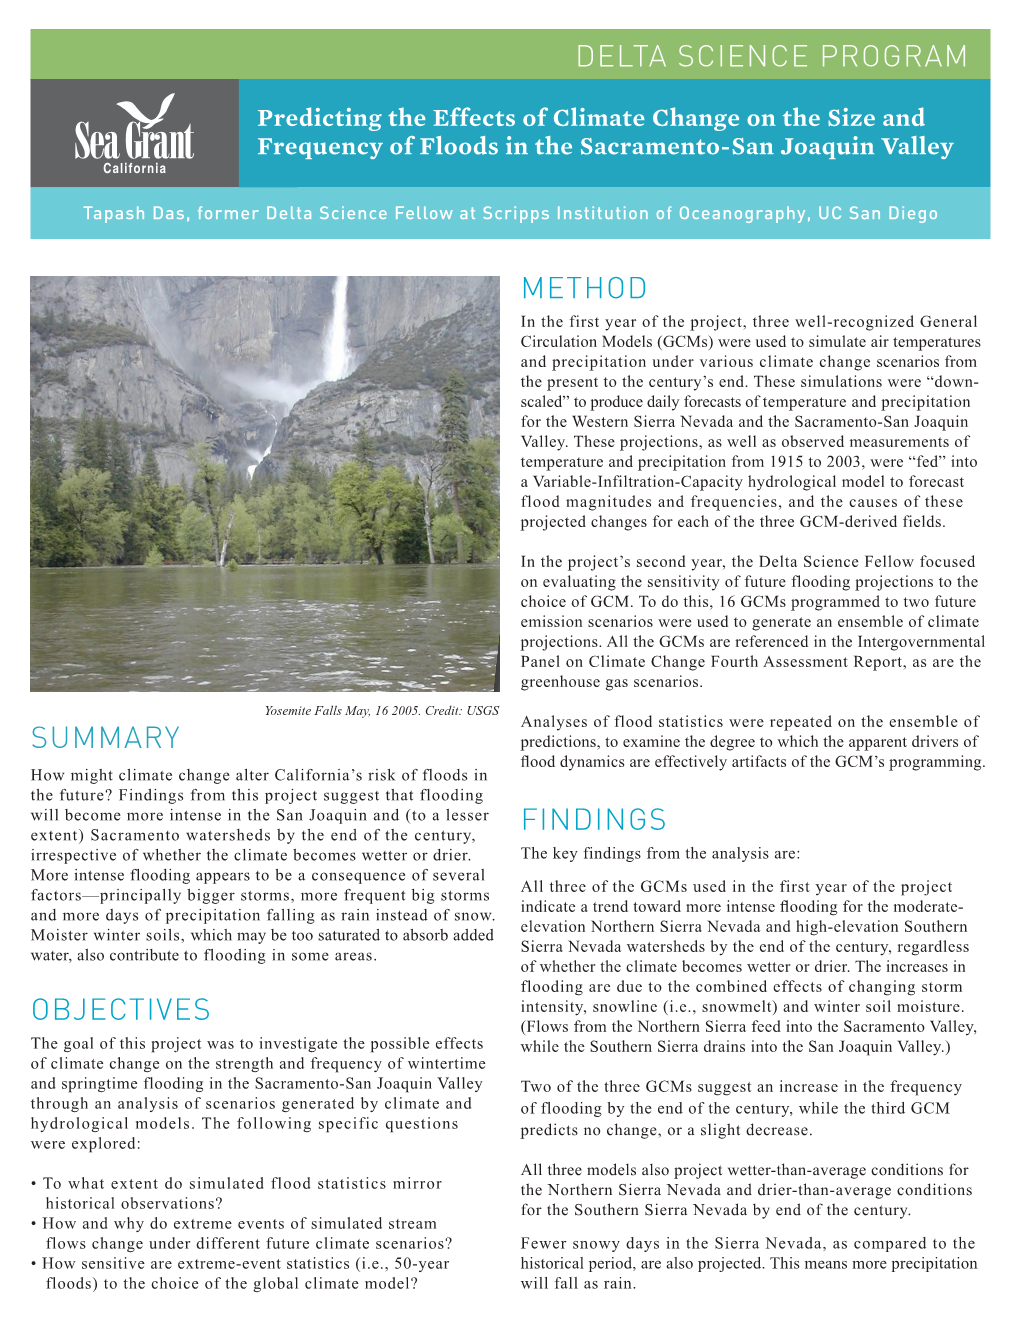 Predicting the Effects of Climate Change on the Size and Frequency of Floods in the Sacramento-San Joaquin Valley